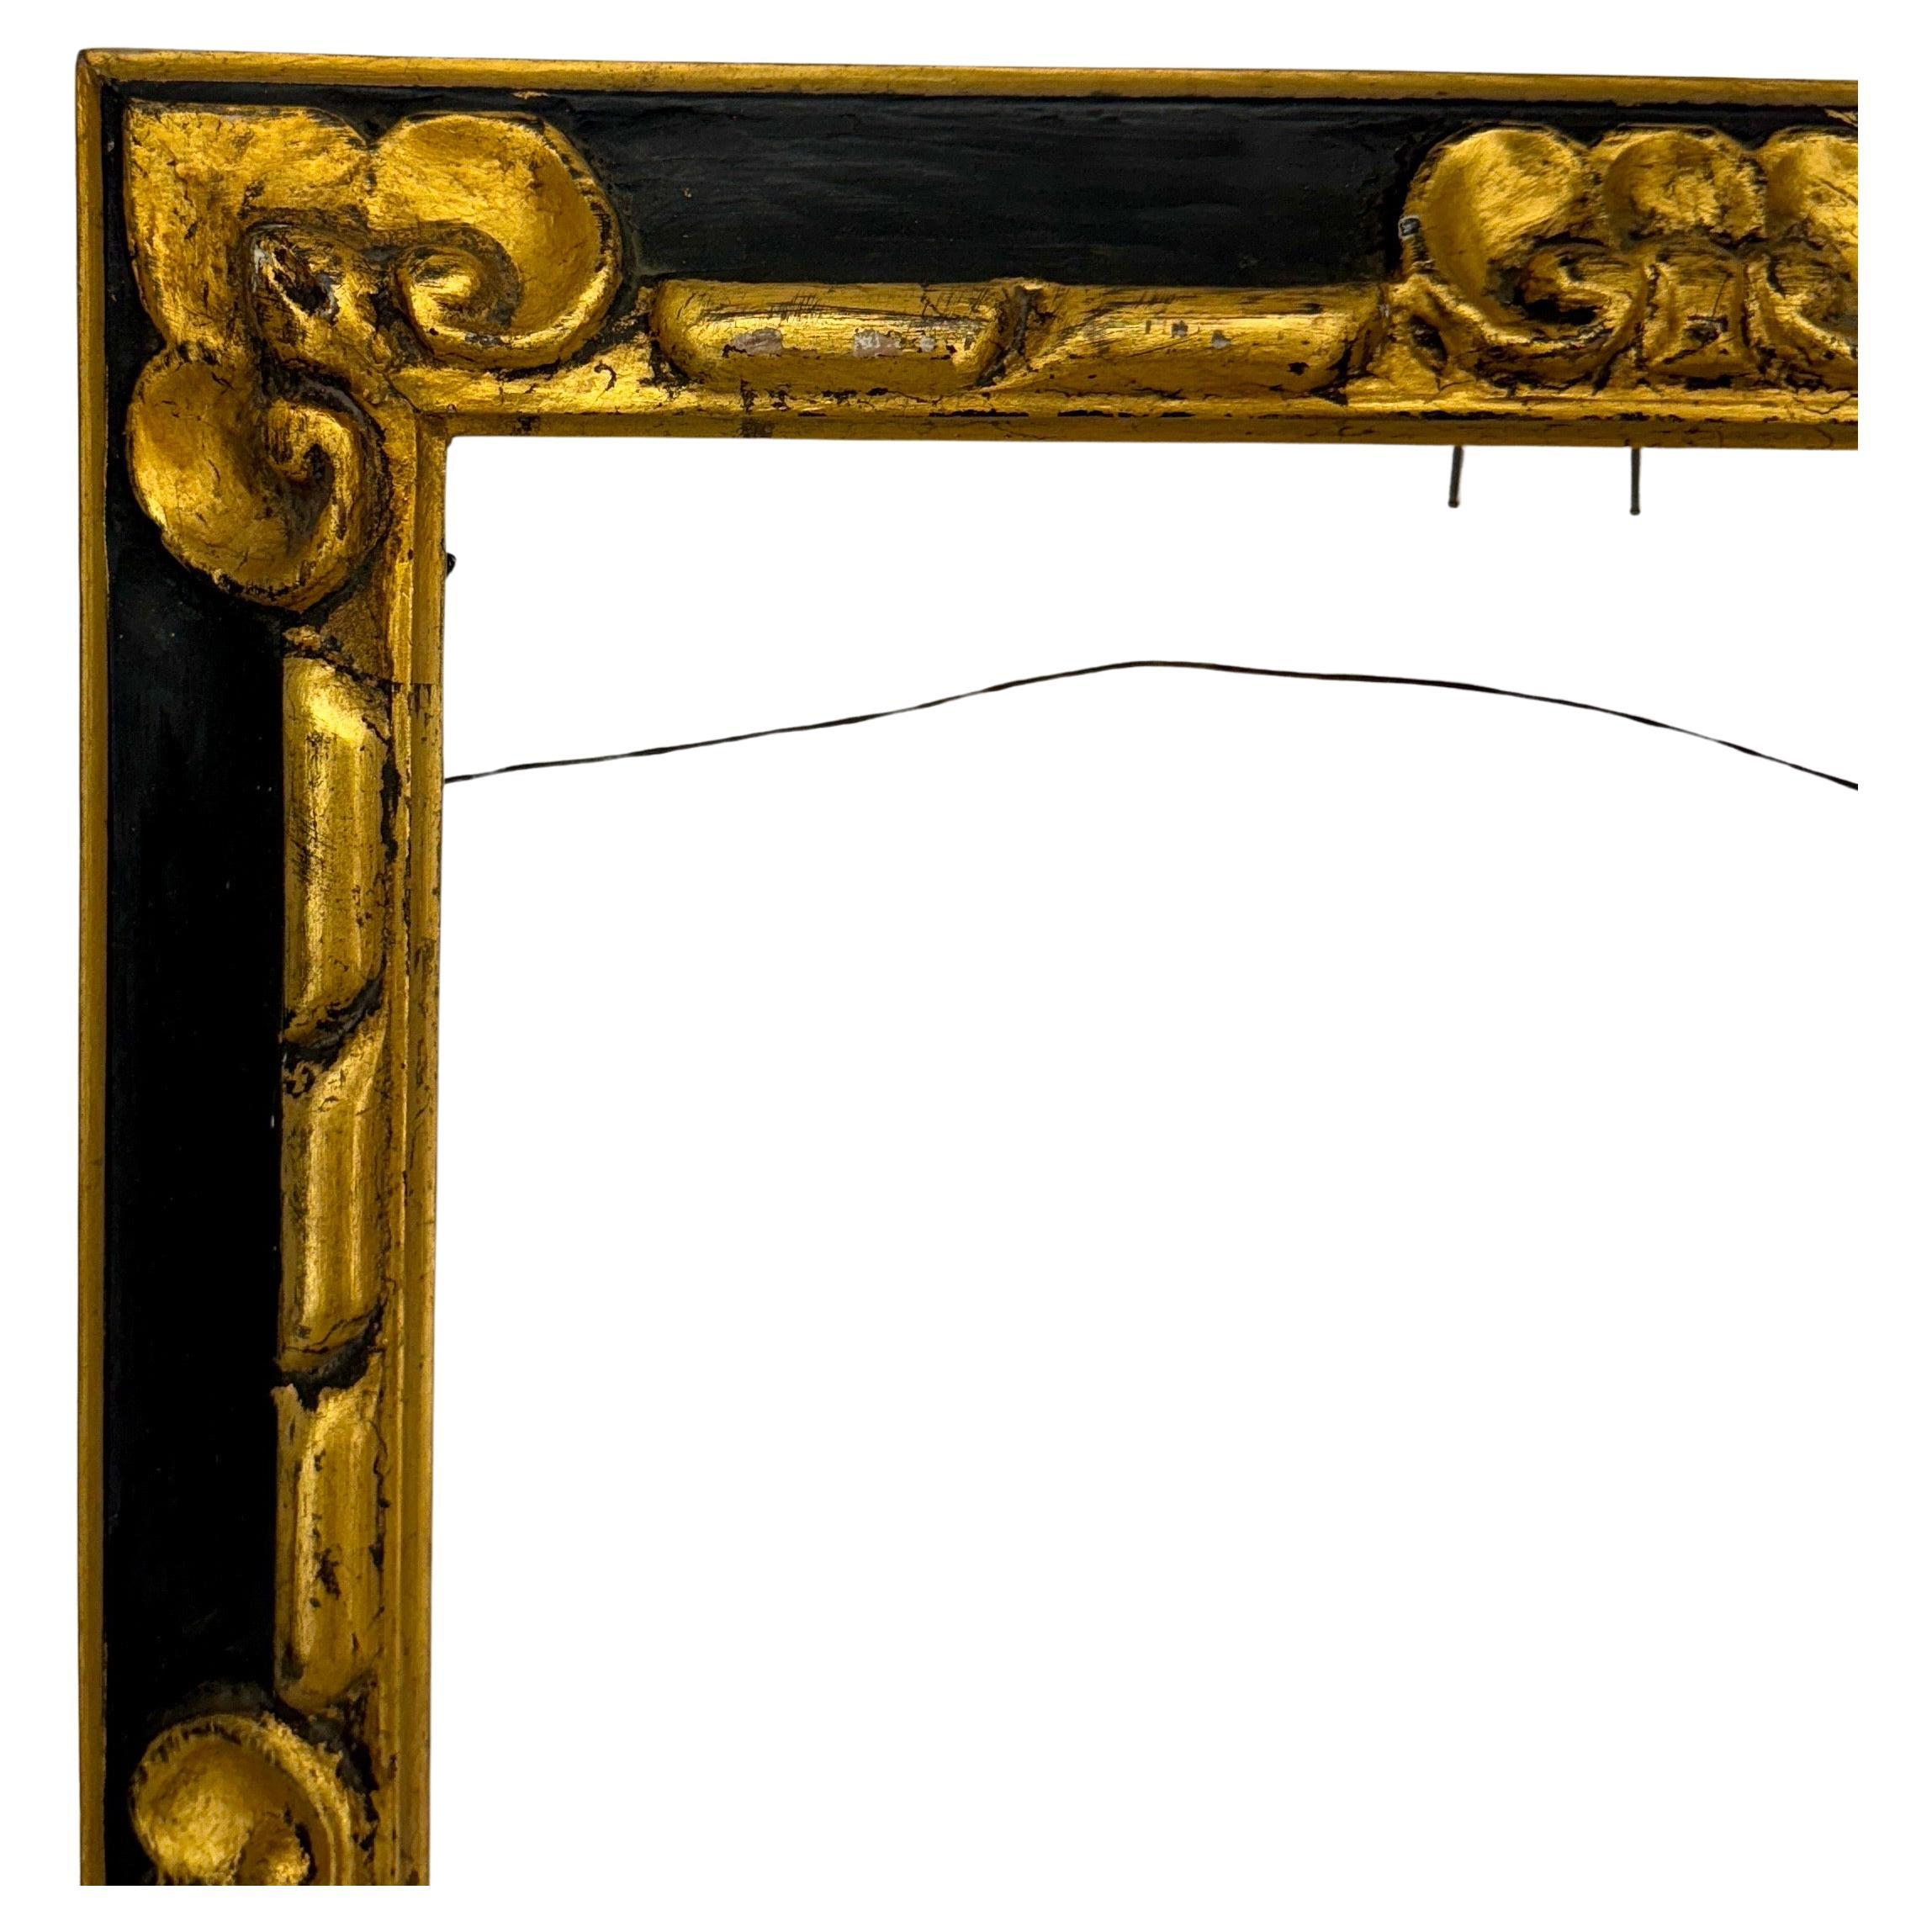 Mid-Century Florentine Black and Gold Gilded Frame, Italy.
Sturdy and beautiful, this frame is ready for a picture and certainly captures that European vibe. 